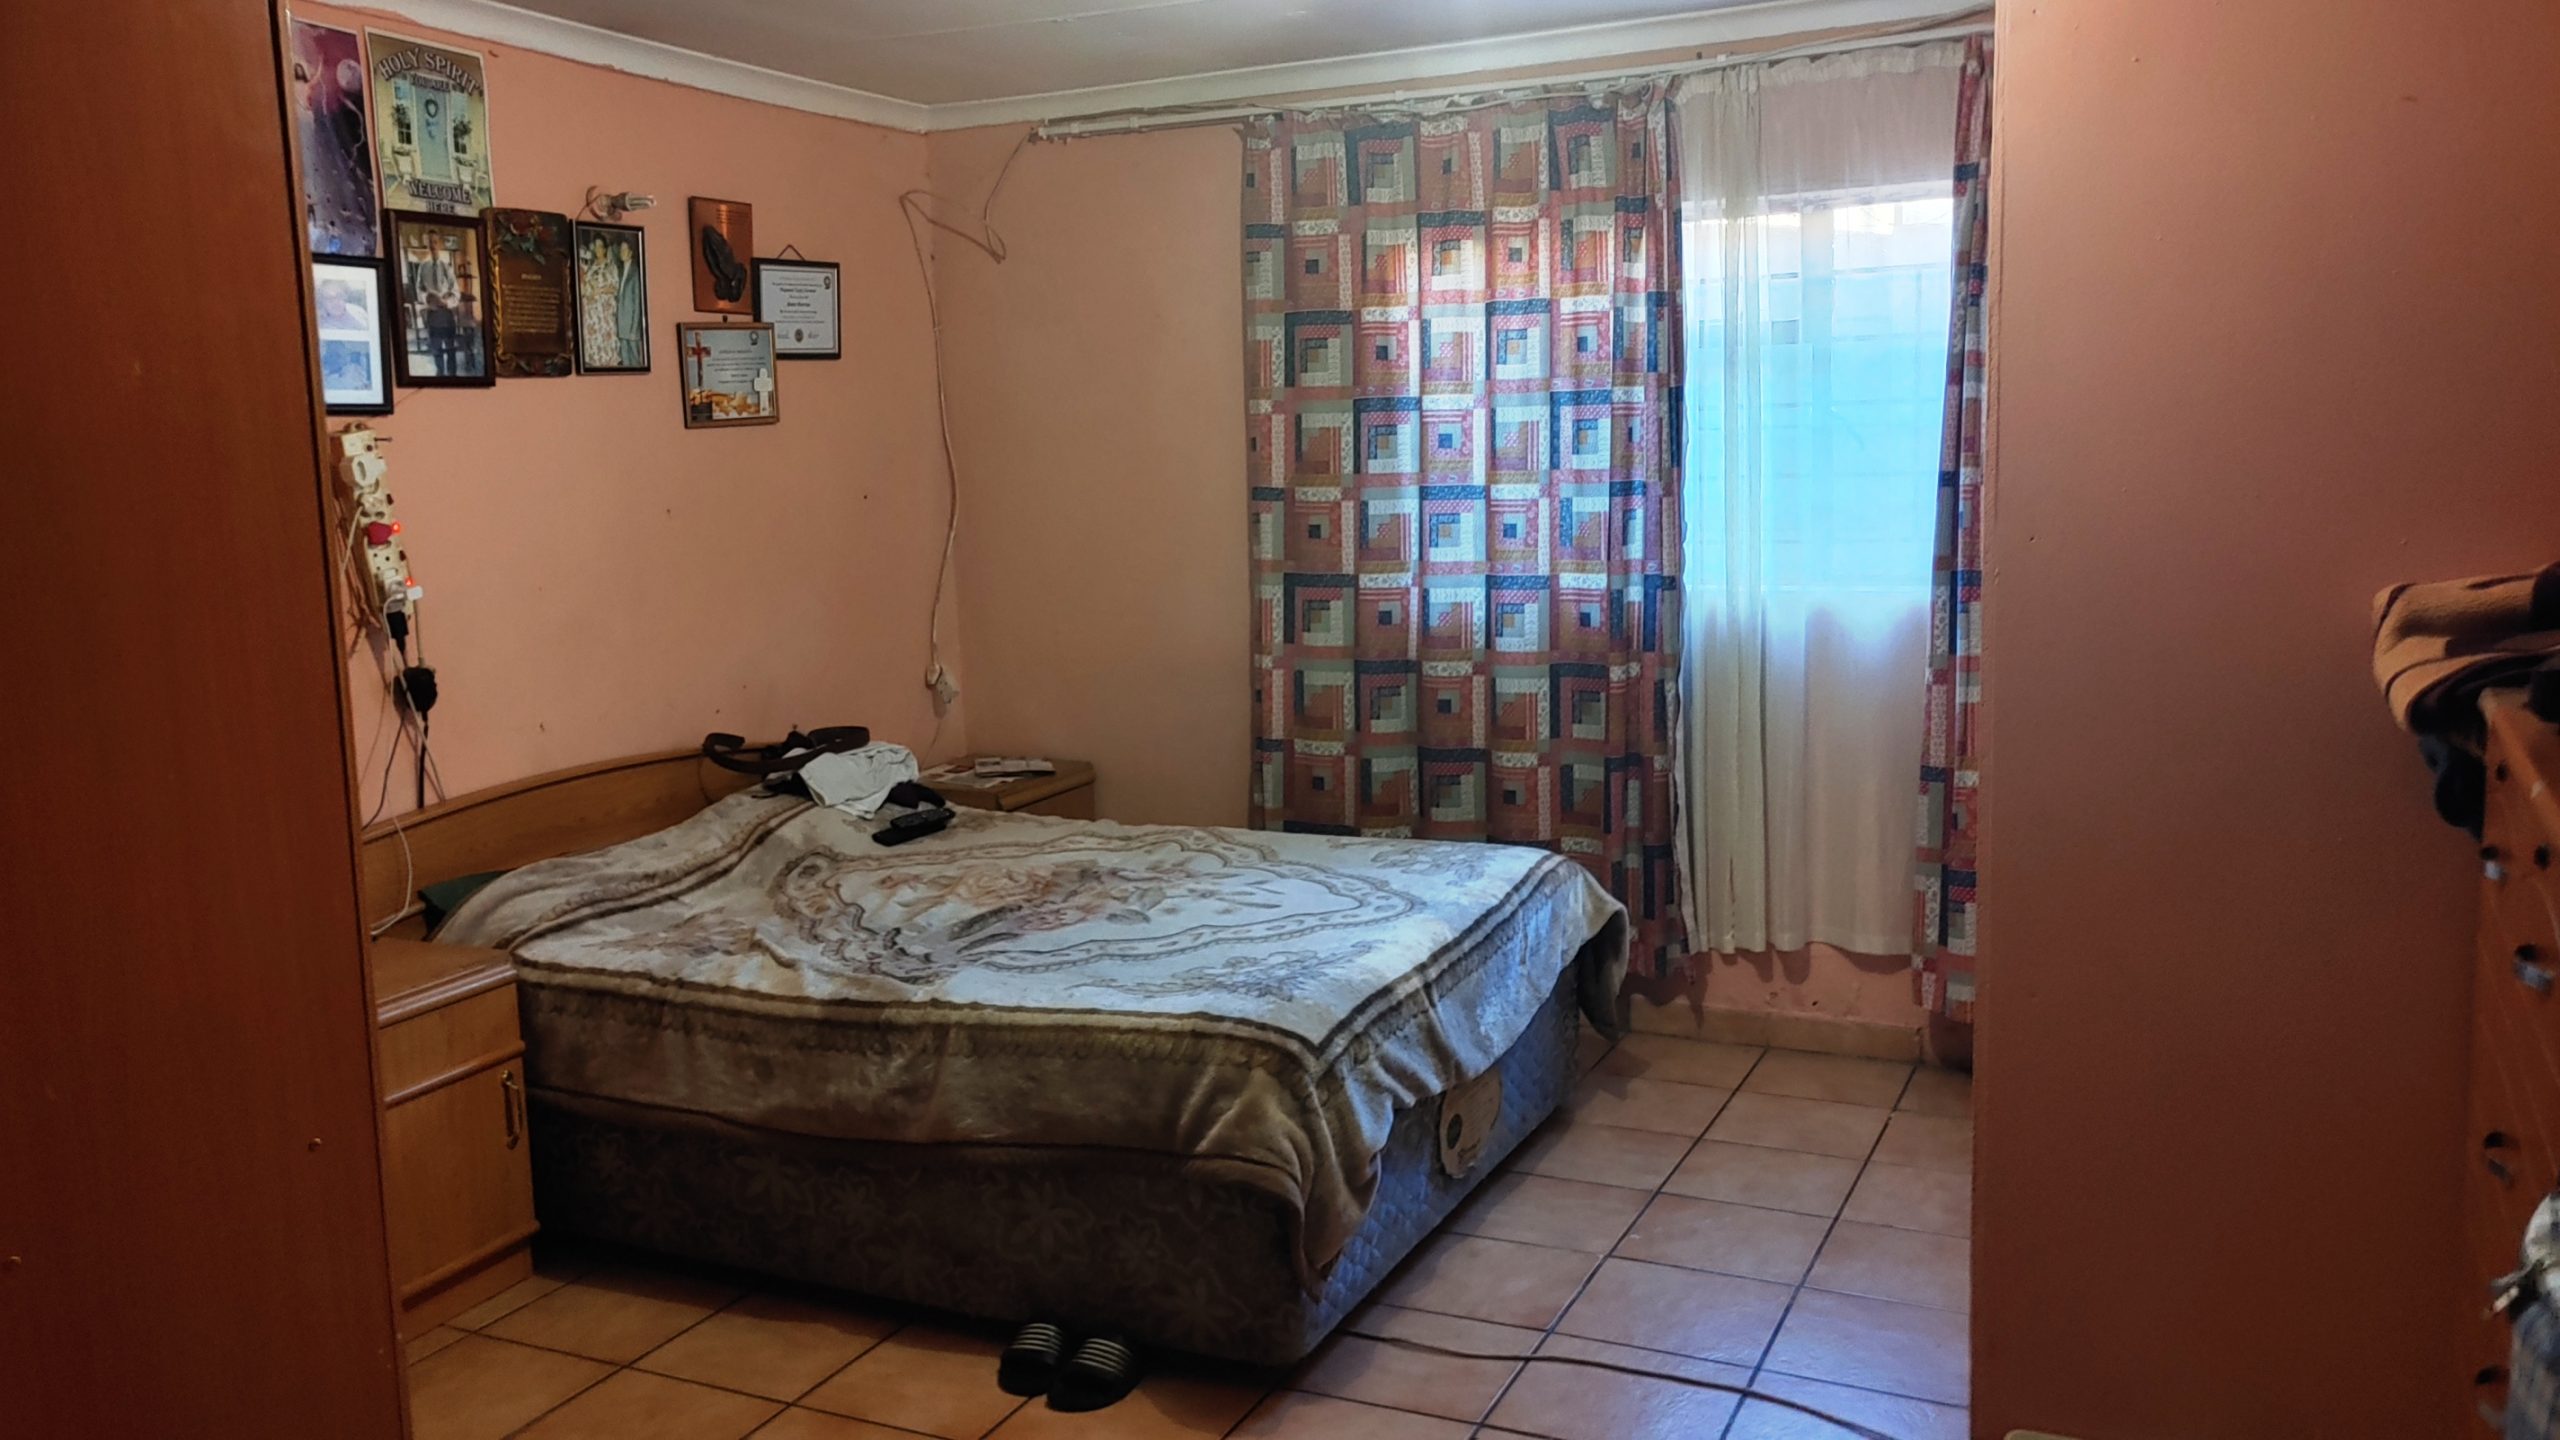 DELVILLE 3 BEDROOM HOME WITH A 2ND 3 BEDROOM HOME FOR SALE for the large extended family and Negotiable- MAKE A OFFER TODAY ON THIS PROPERTY